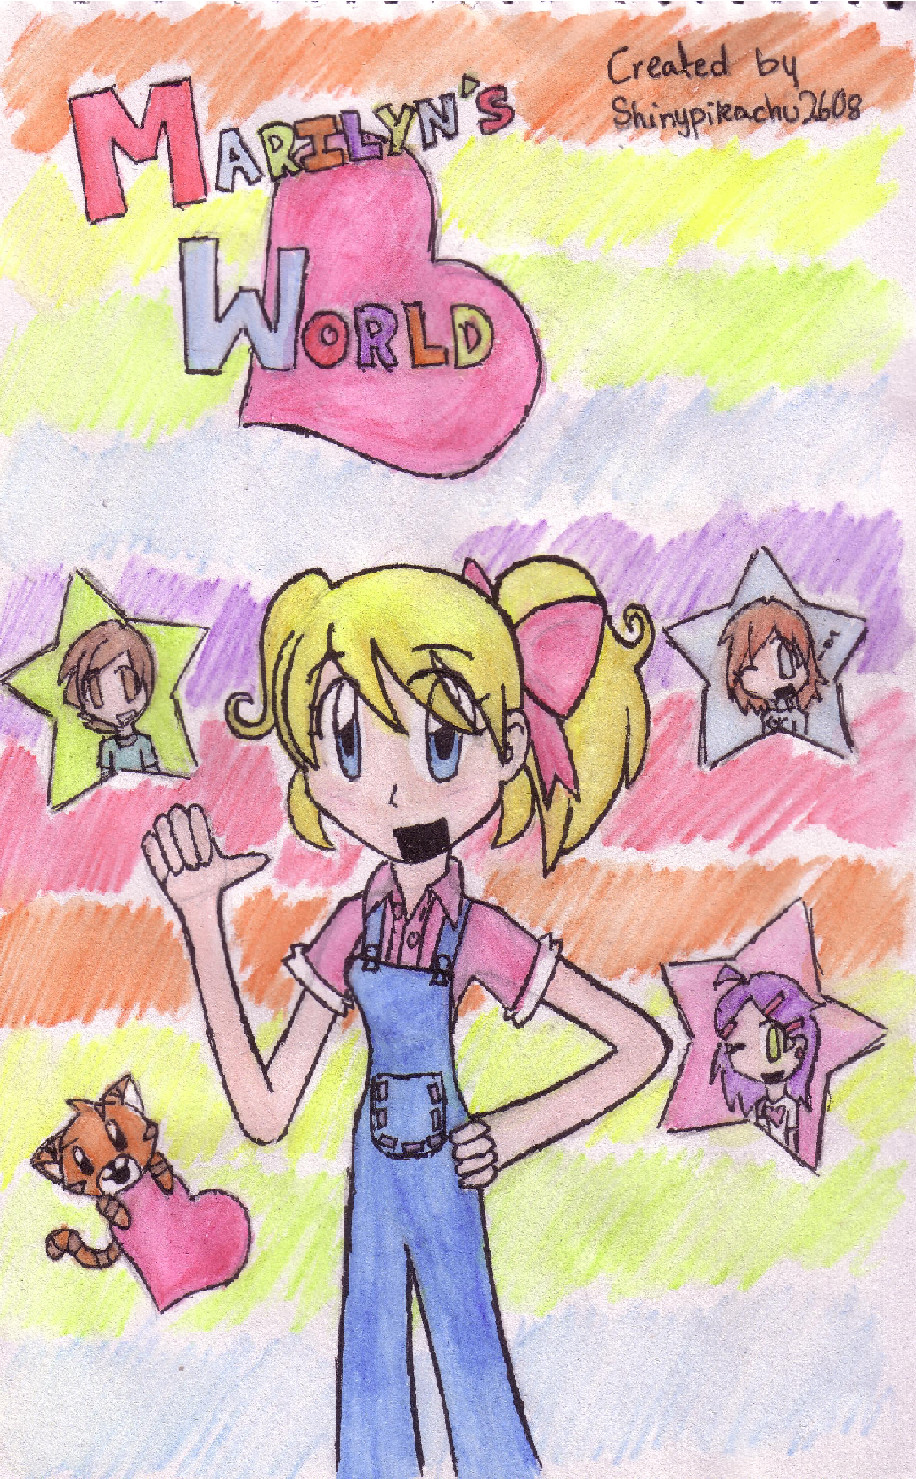 Marylin's World(cover) by shinypikachu2608